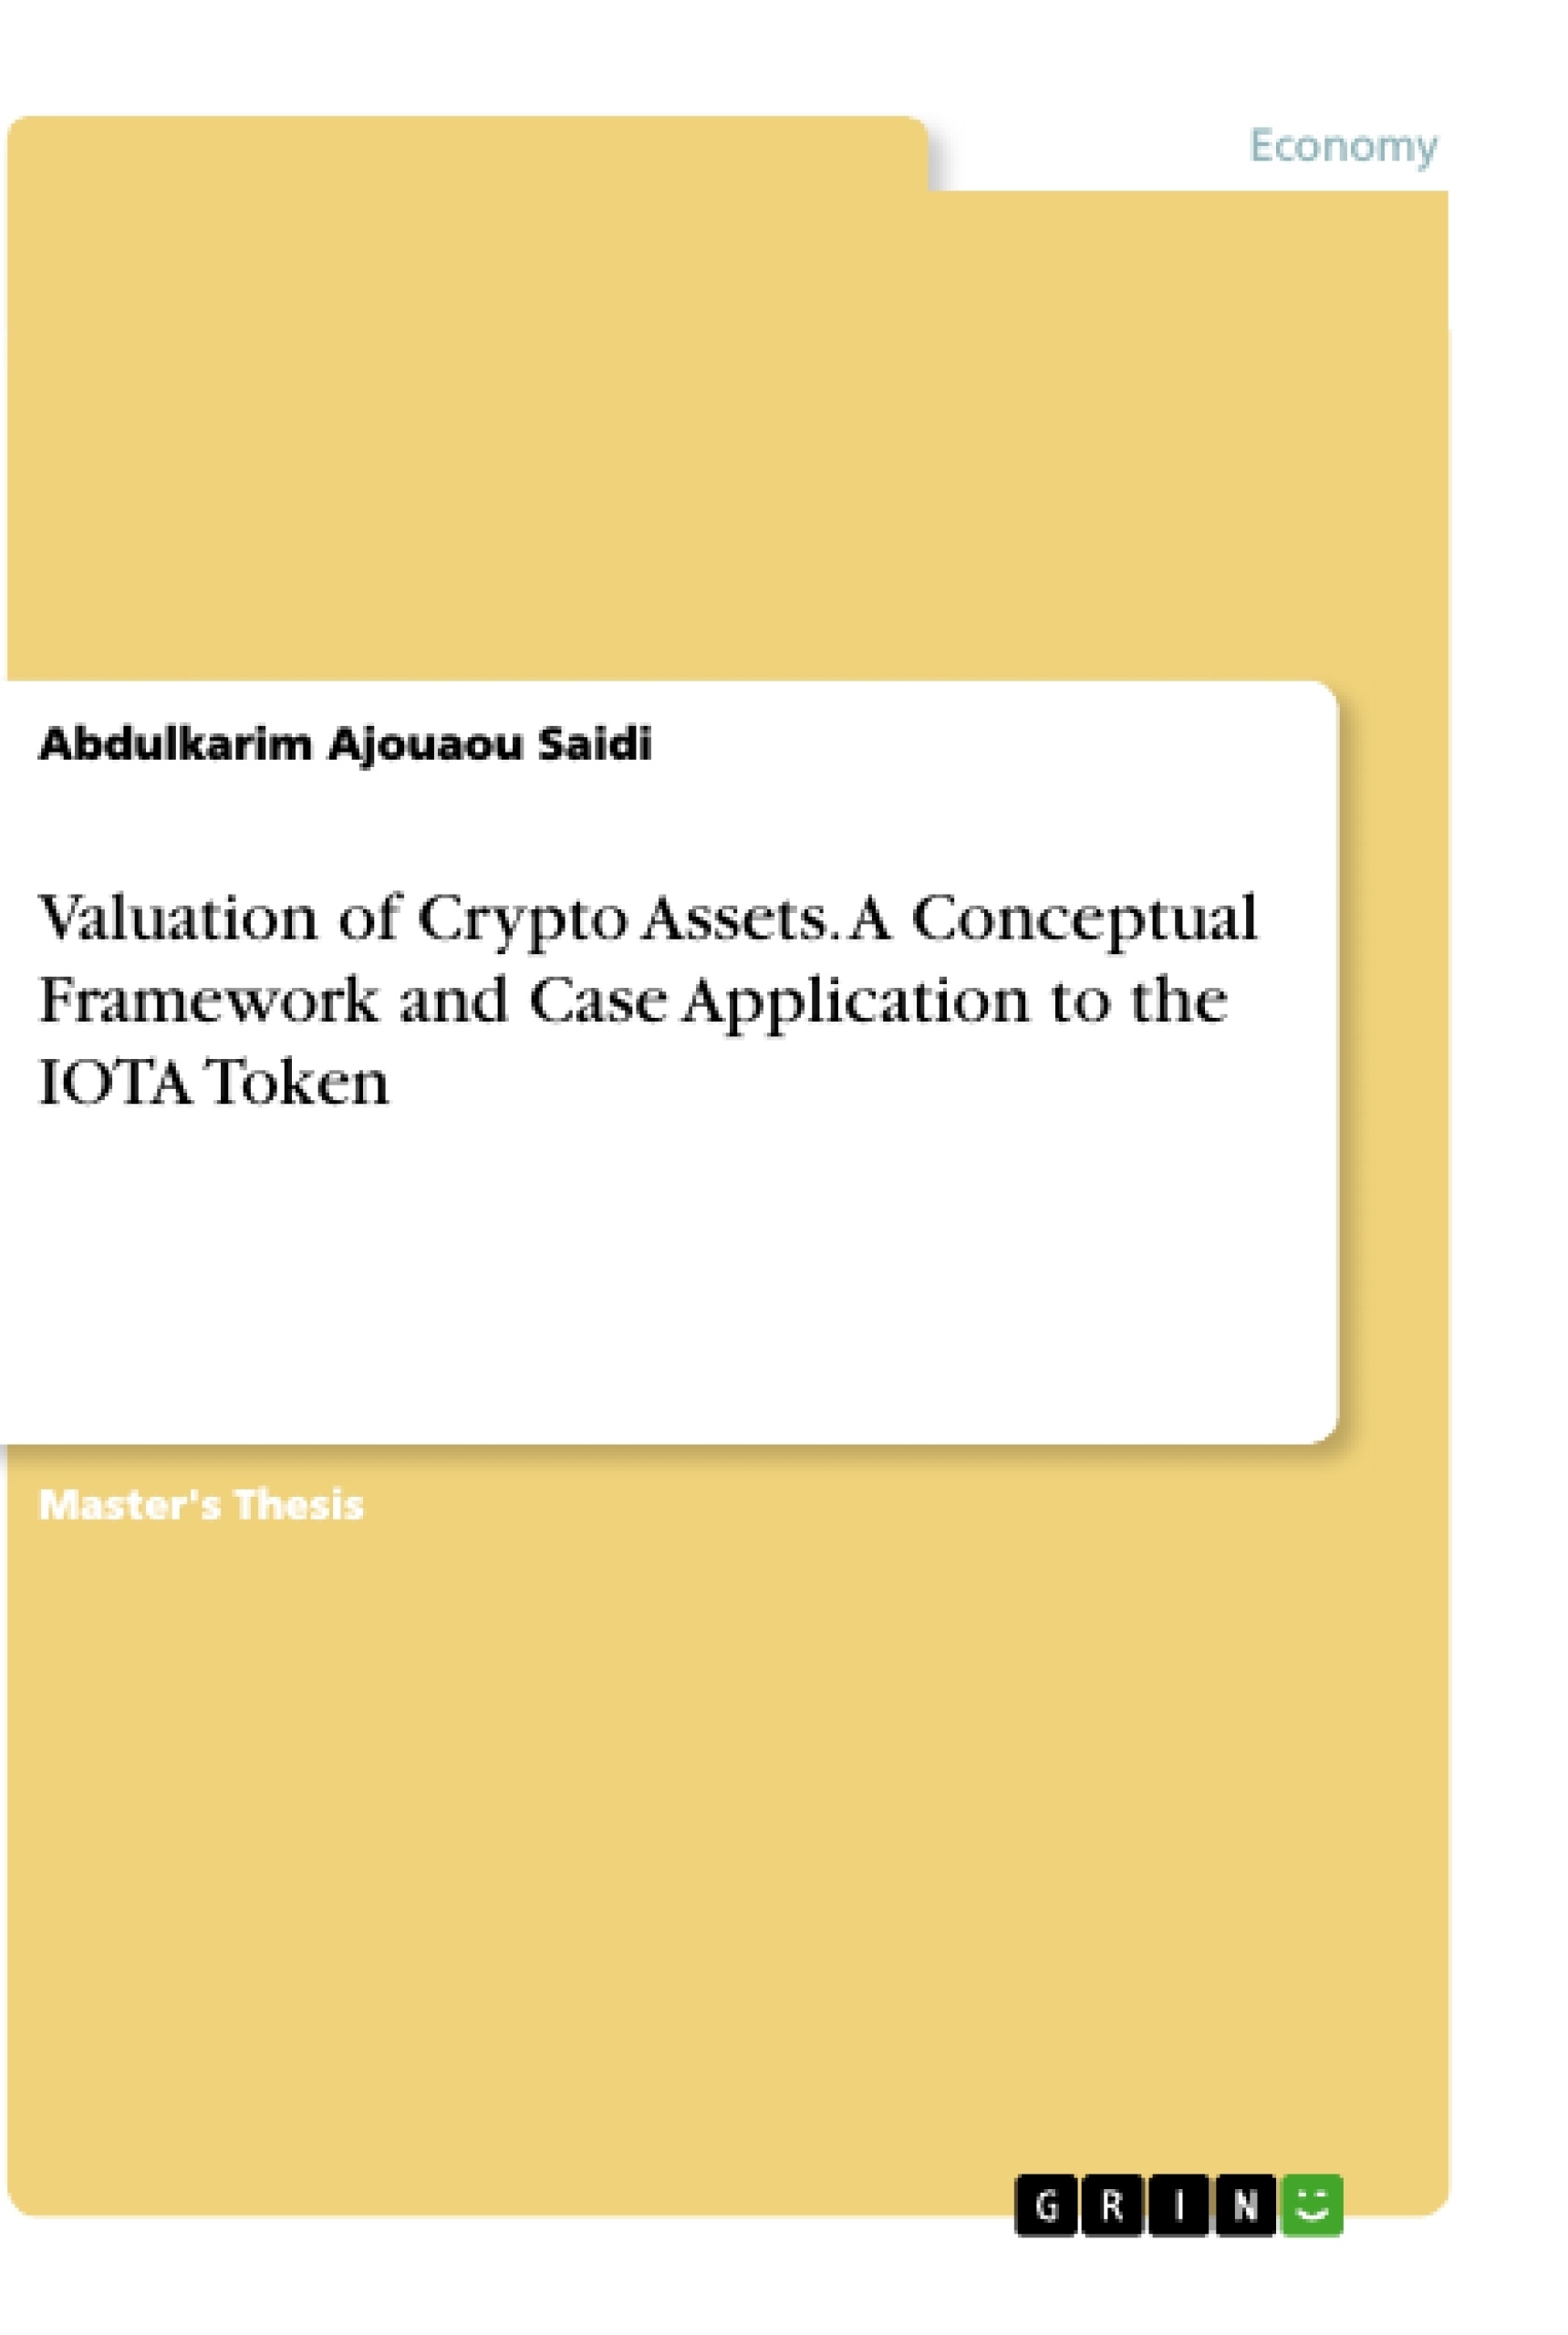 Titel: Valuation of Crypto Assets. A Conceptual Framework and Case Application to the IOTA Token